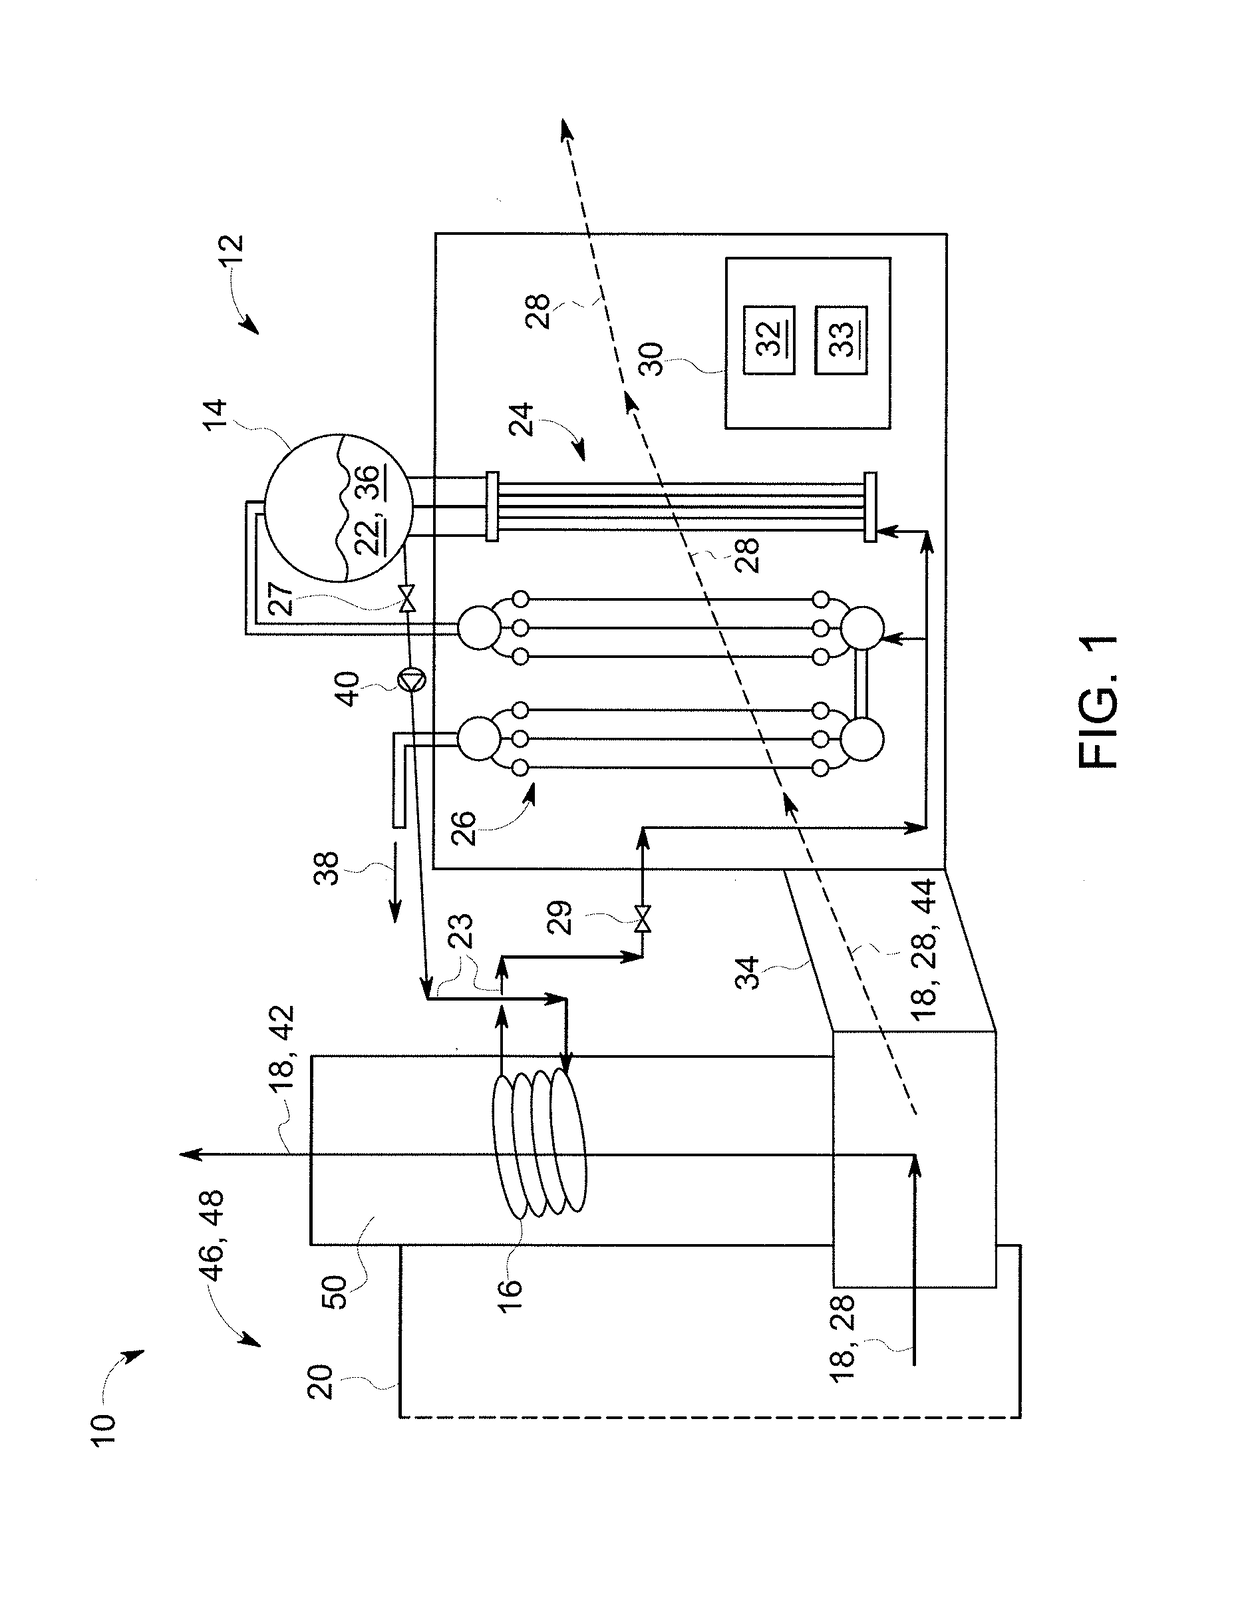 System and method for preheating a heat recovery steam generator